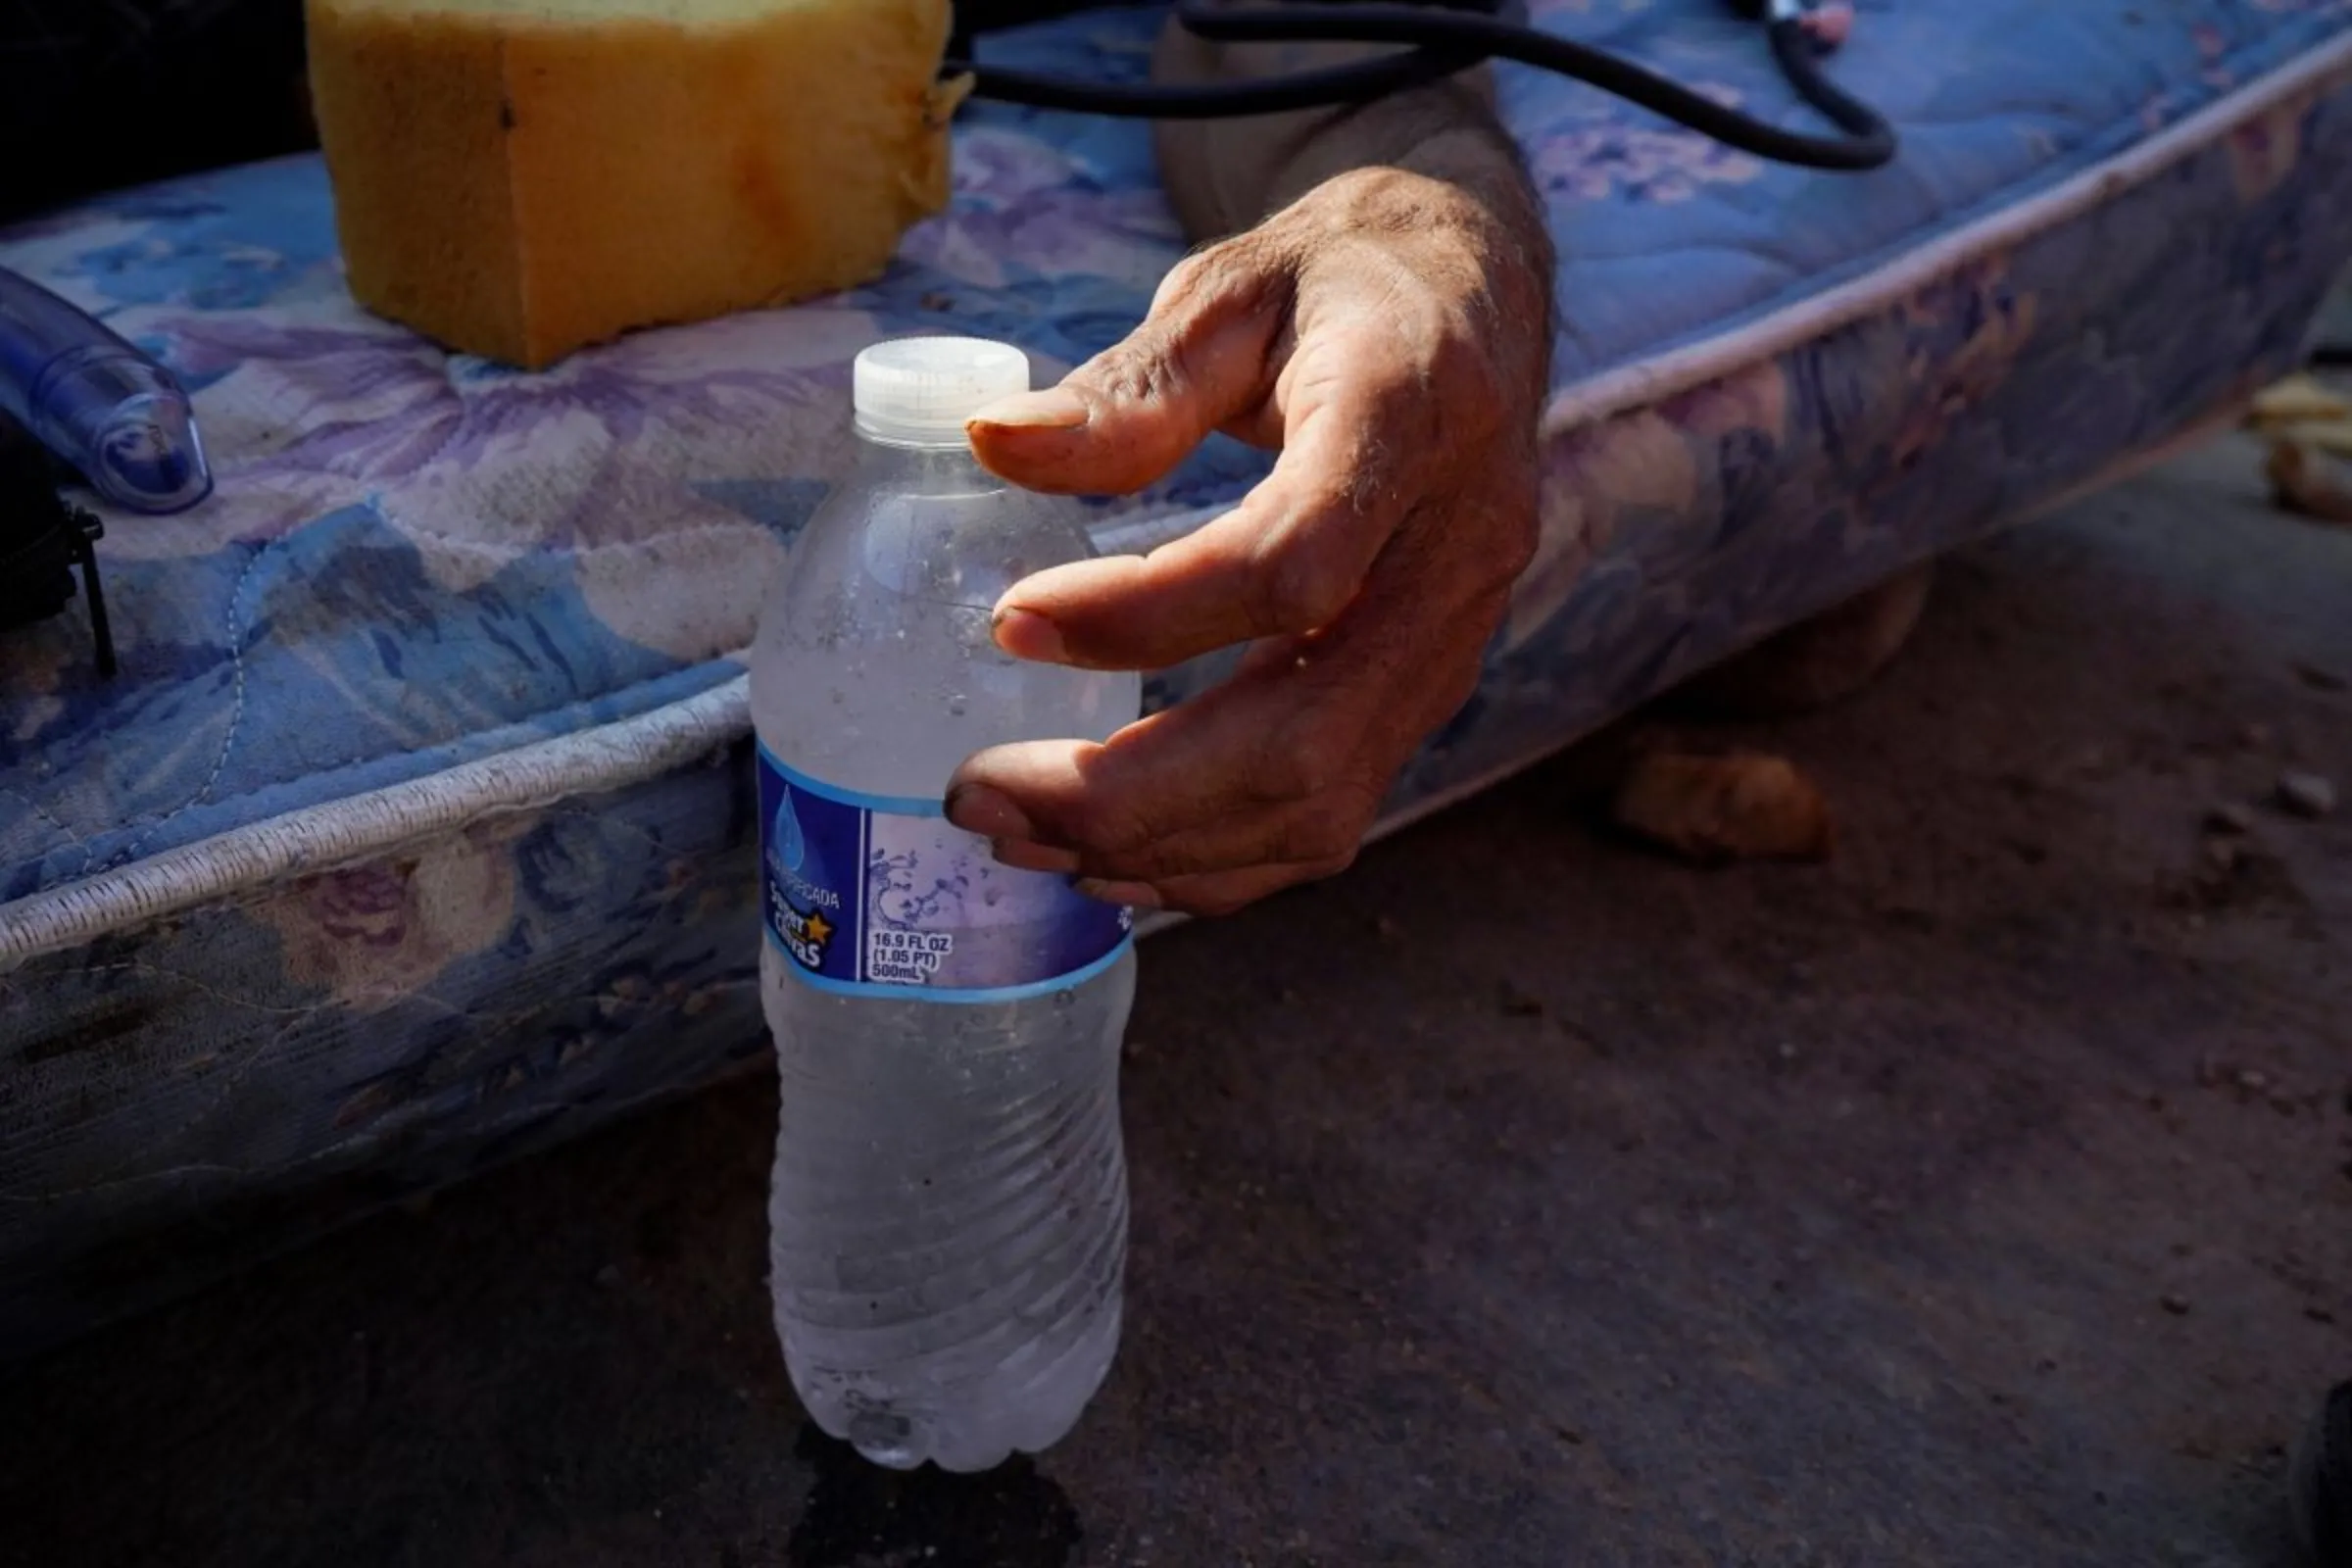 A man showing symptoms of heat exhaustion touches a bottle of water provided by paramedics during a heatwave in Mexicali, Mexico, July 20, 2023. REUTERS/Victor Medina